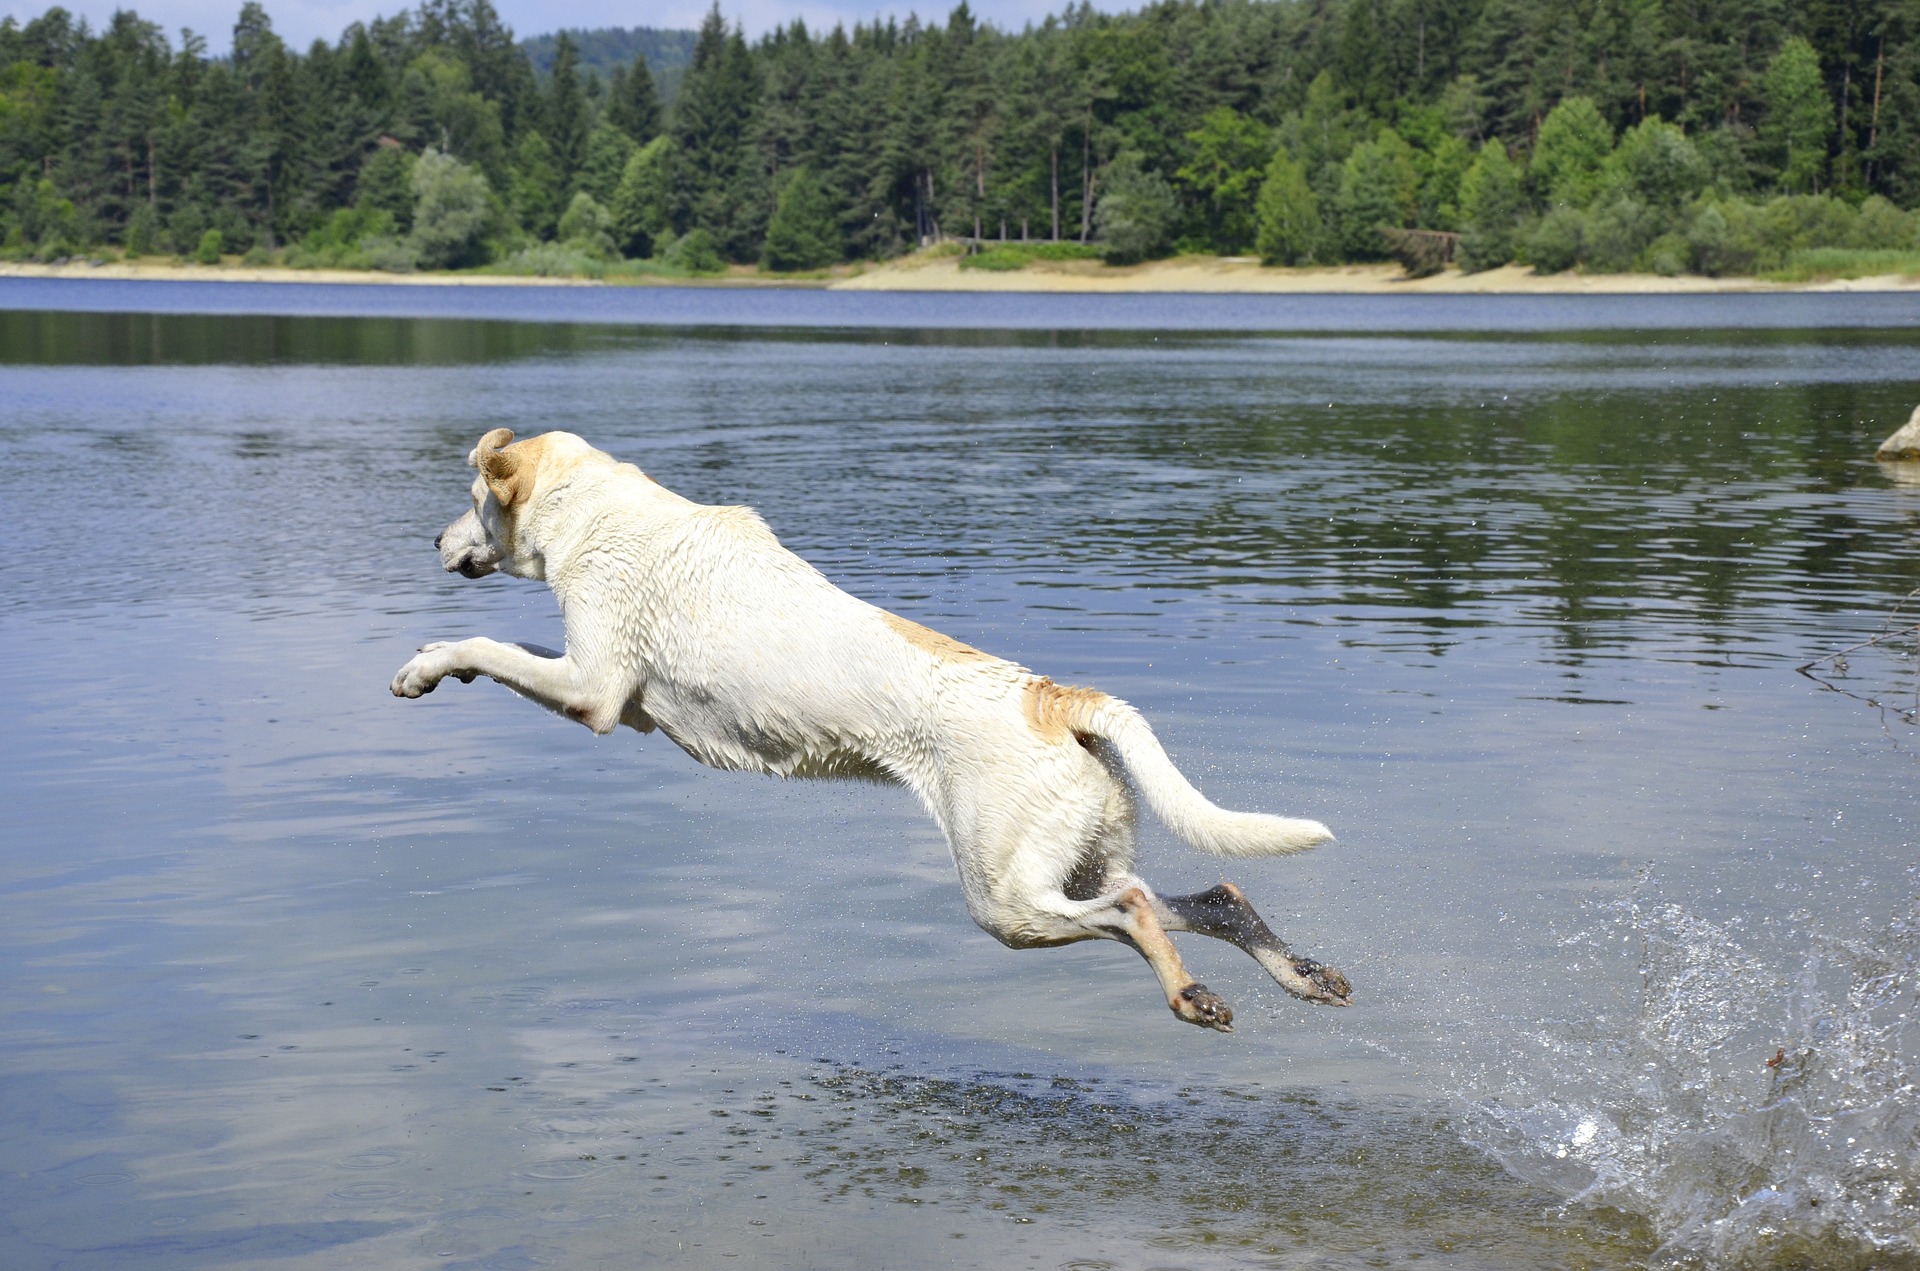 Dock diving should be all about fun for your dog!